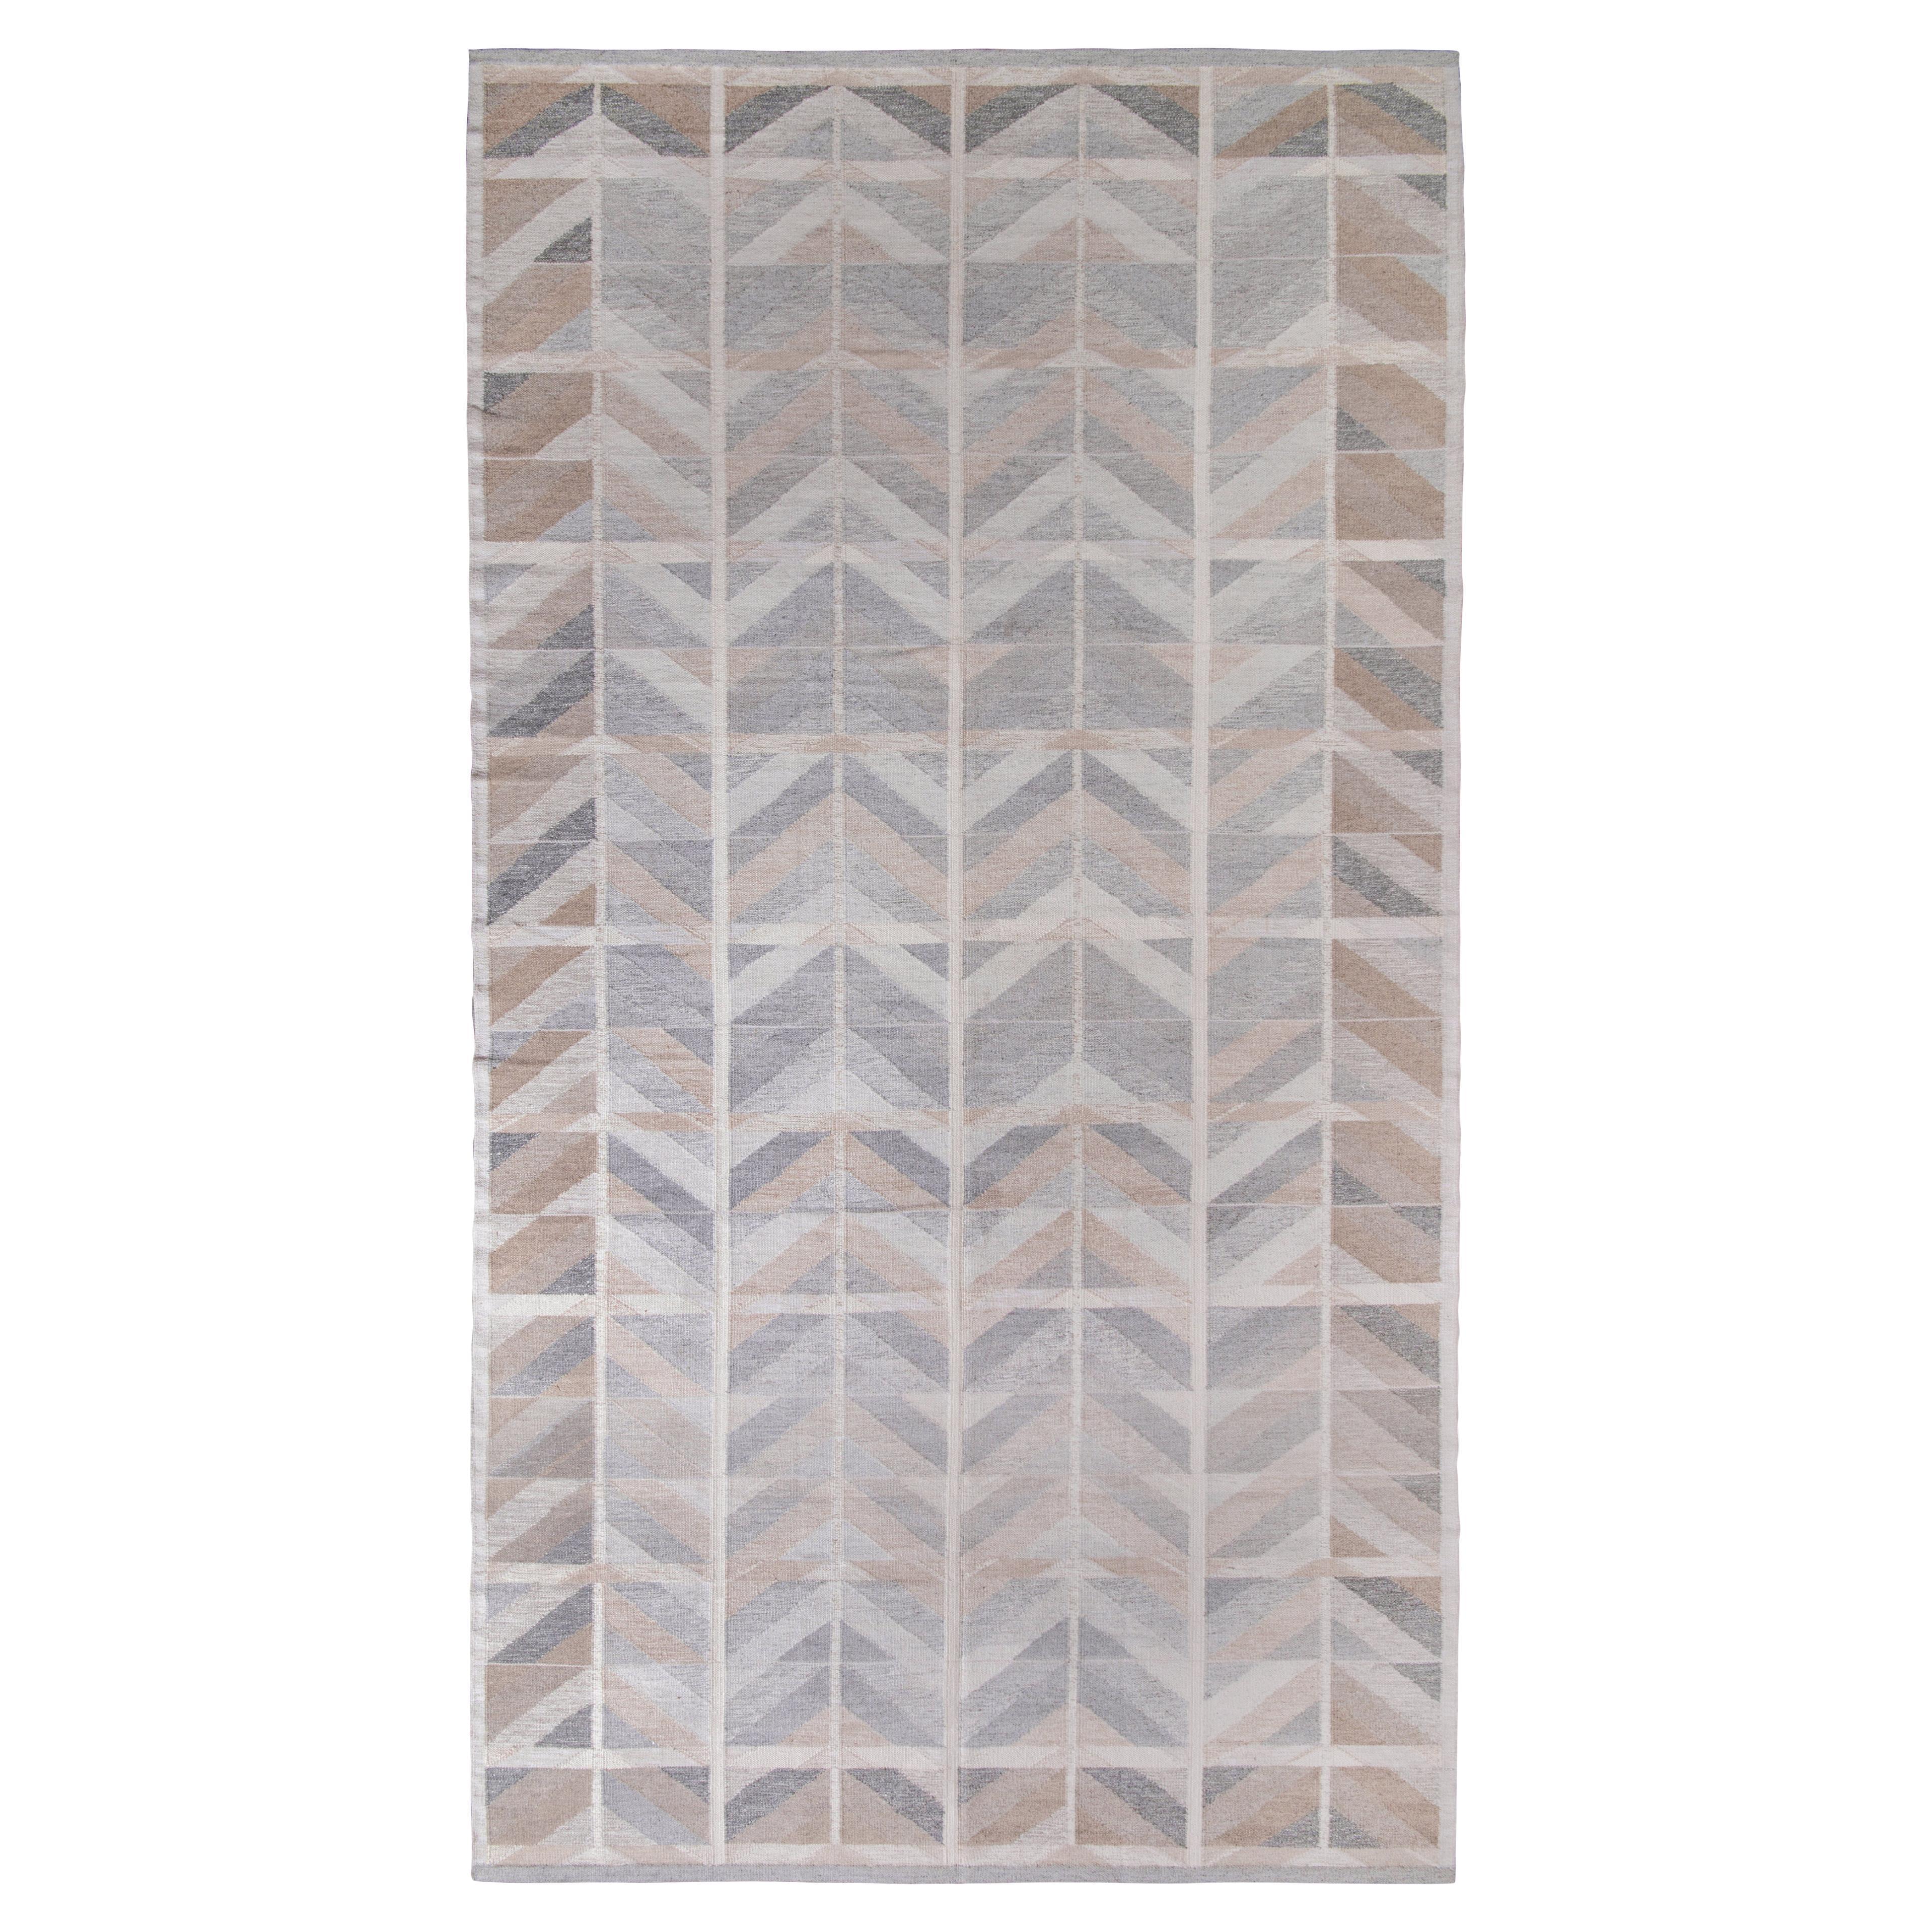 Rug & Kilim’s Scandinavian Style Kilim in Gray and Beige-Brown Chevron Pattern For Sale